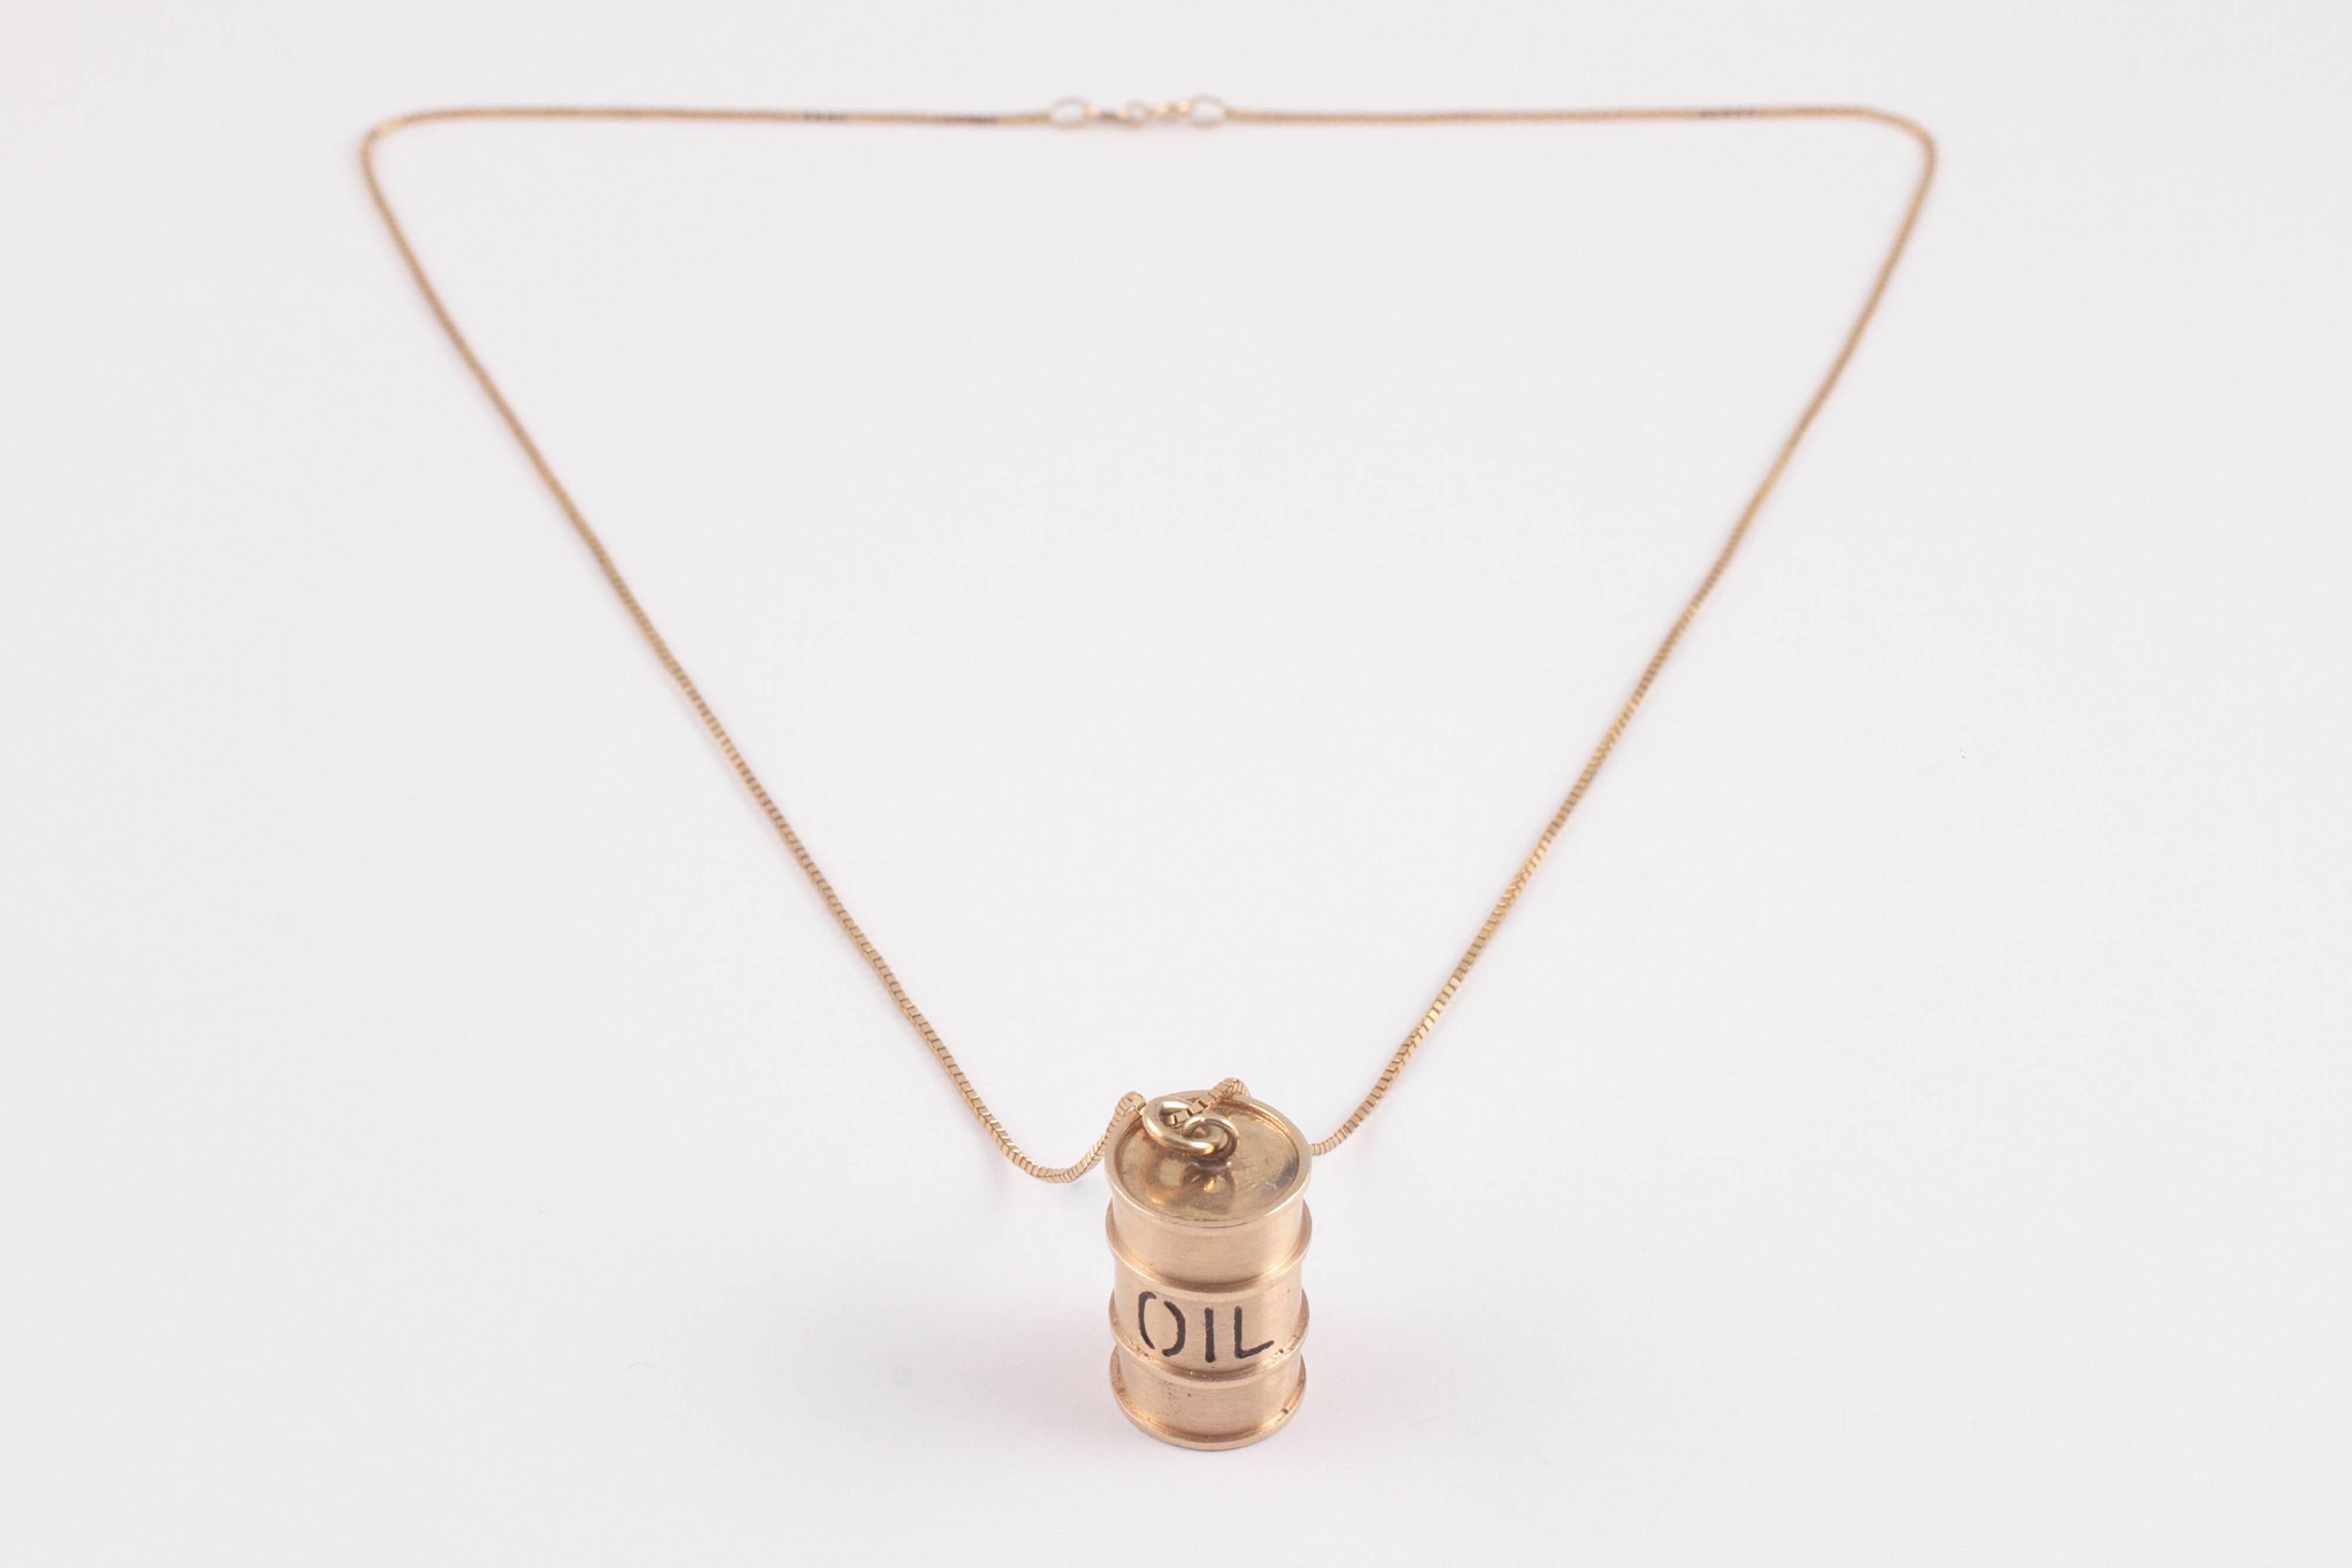 14 Karat Yellow Gold Barrel filled with Oil.  Whether you are an oil baron or just appreciate the humor of this little barrel, you'll have fun with the Oil Necklace. A great conversation starter. 